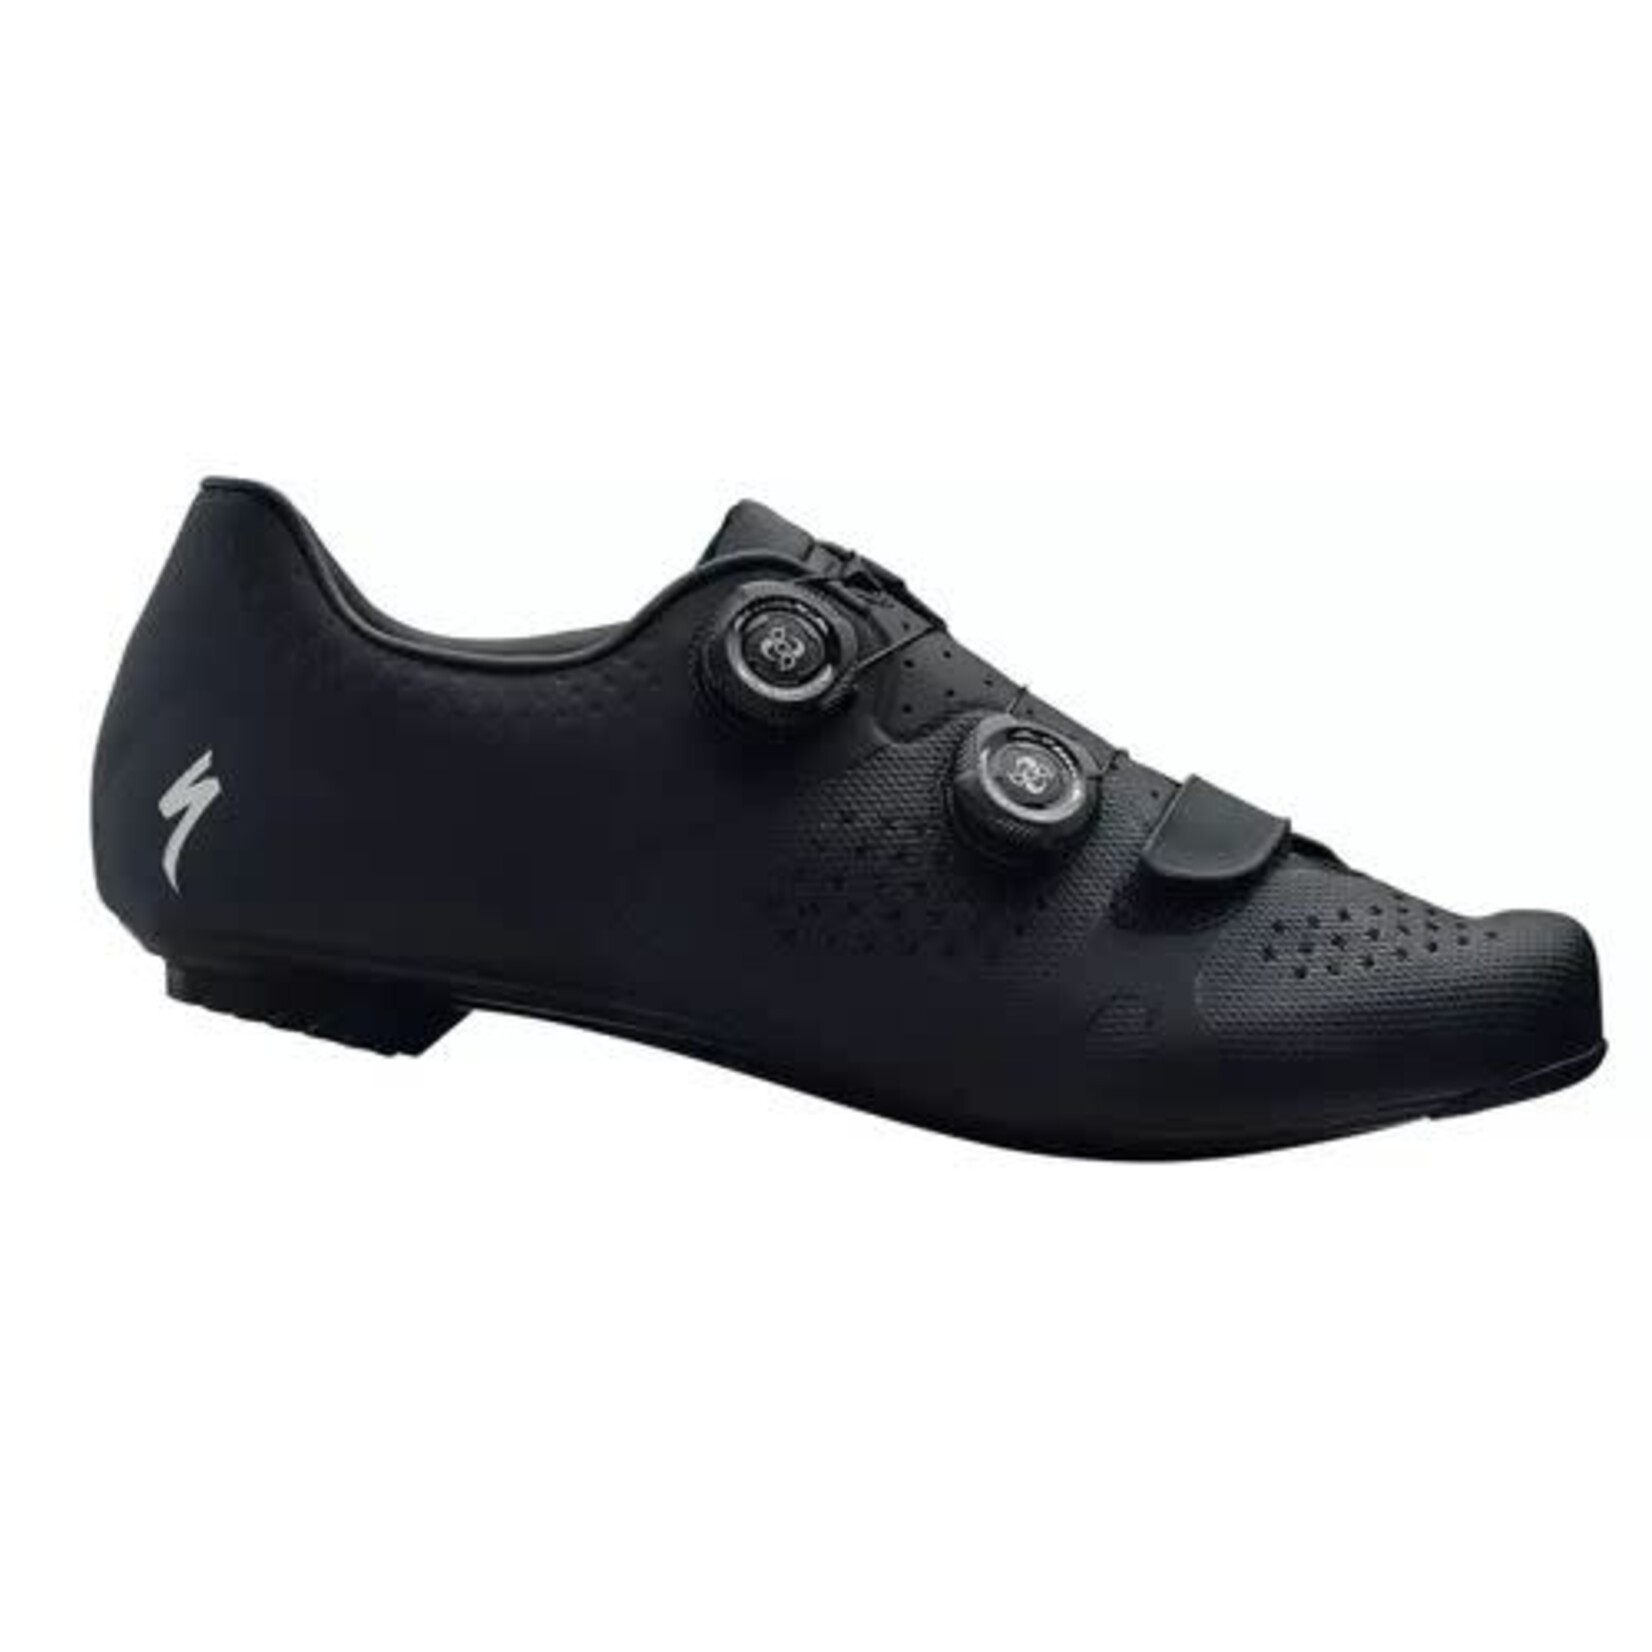 Specialized TORCH 3.0 RD SHOE BLK 36